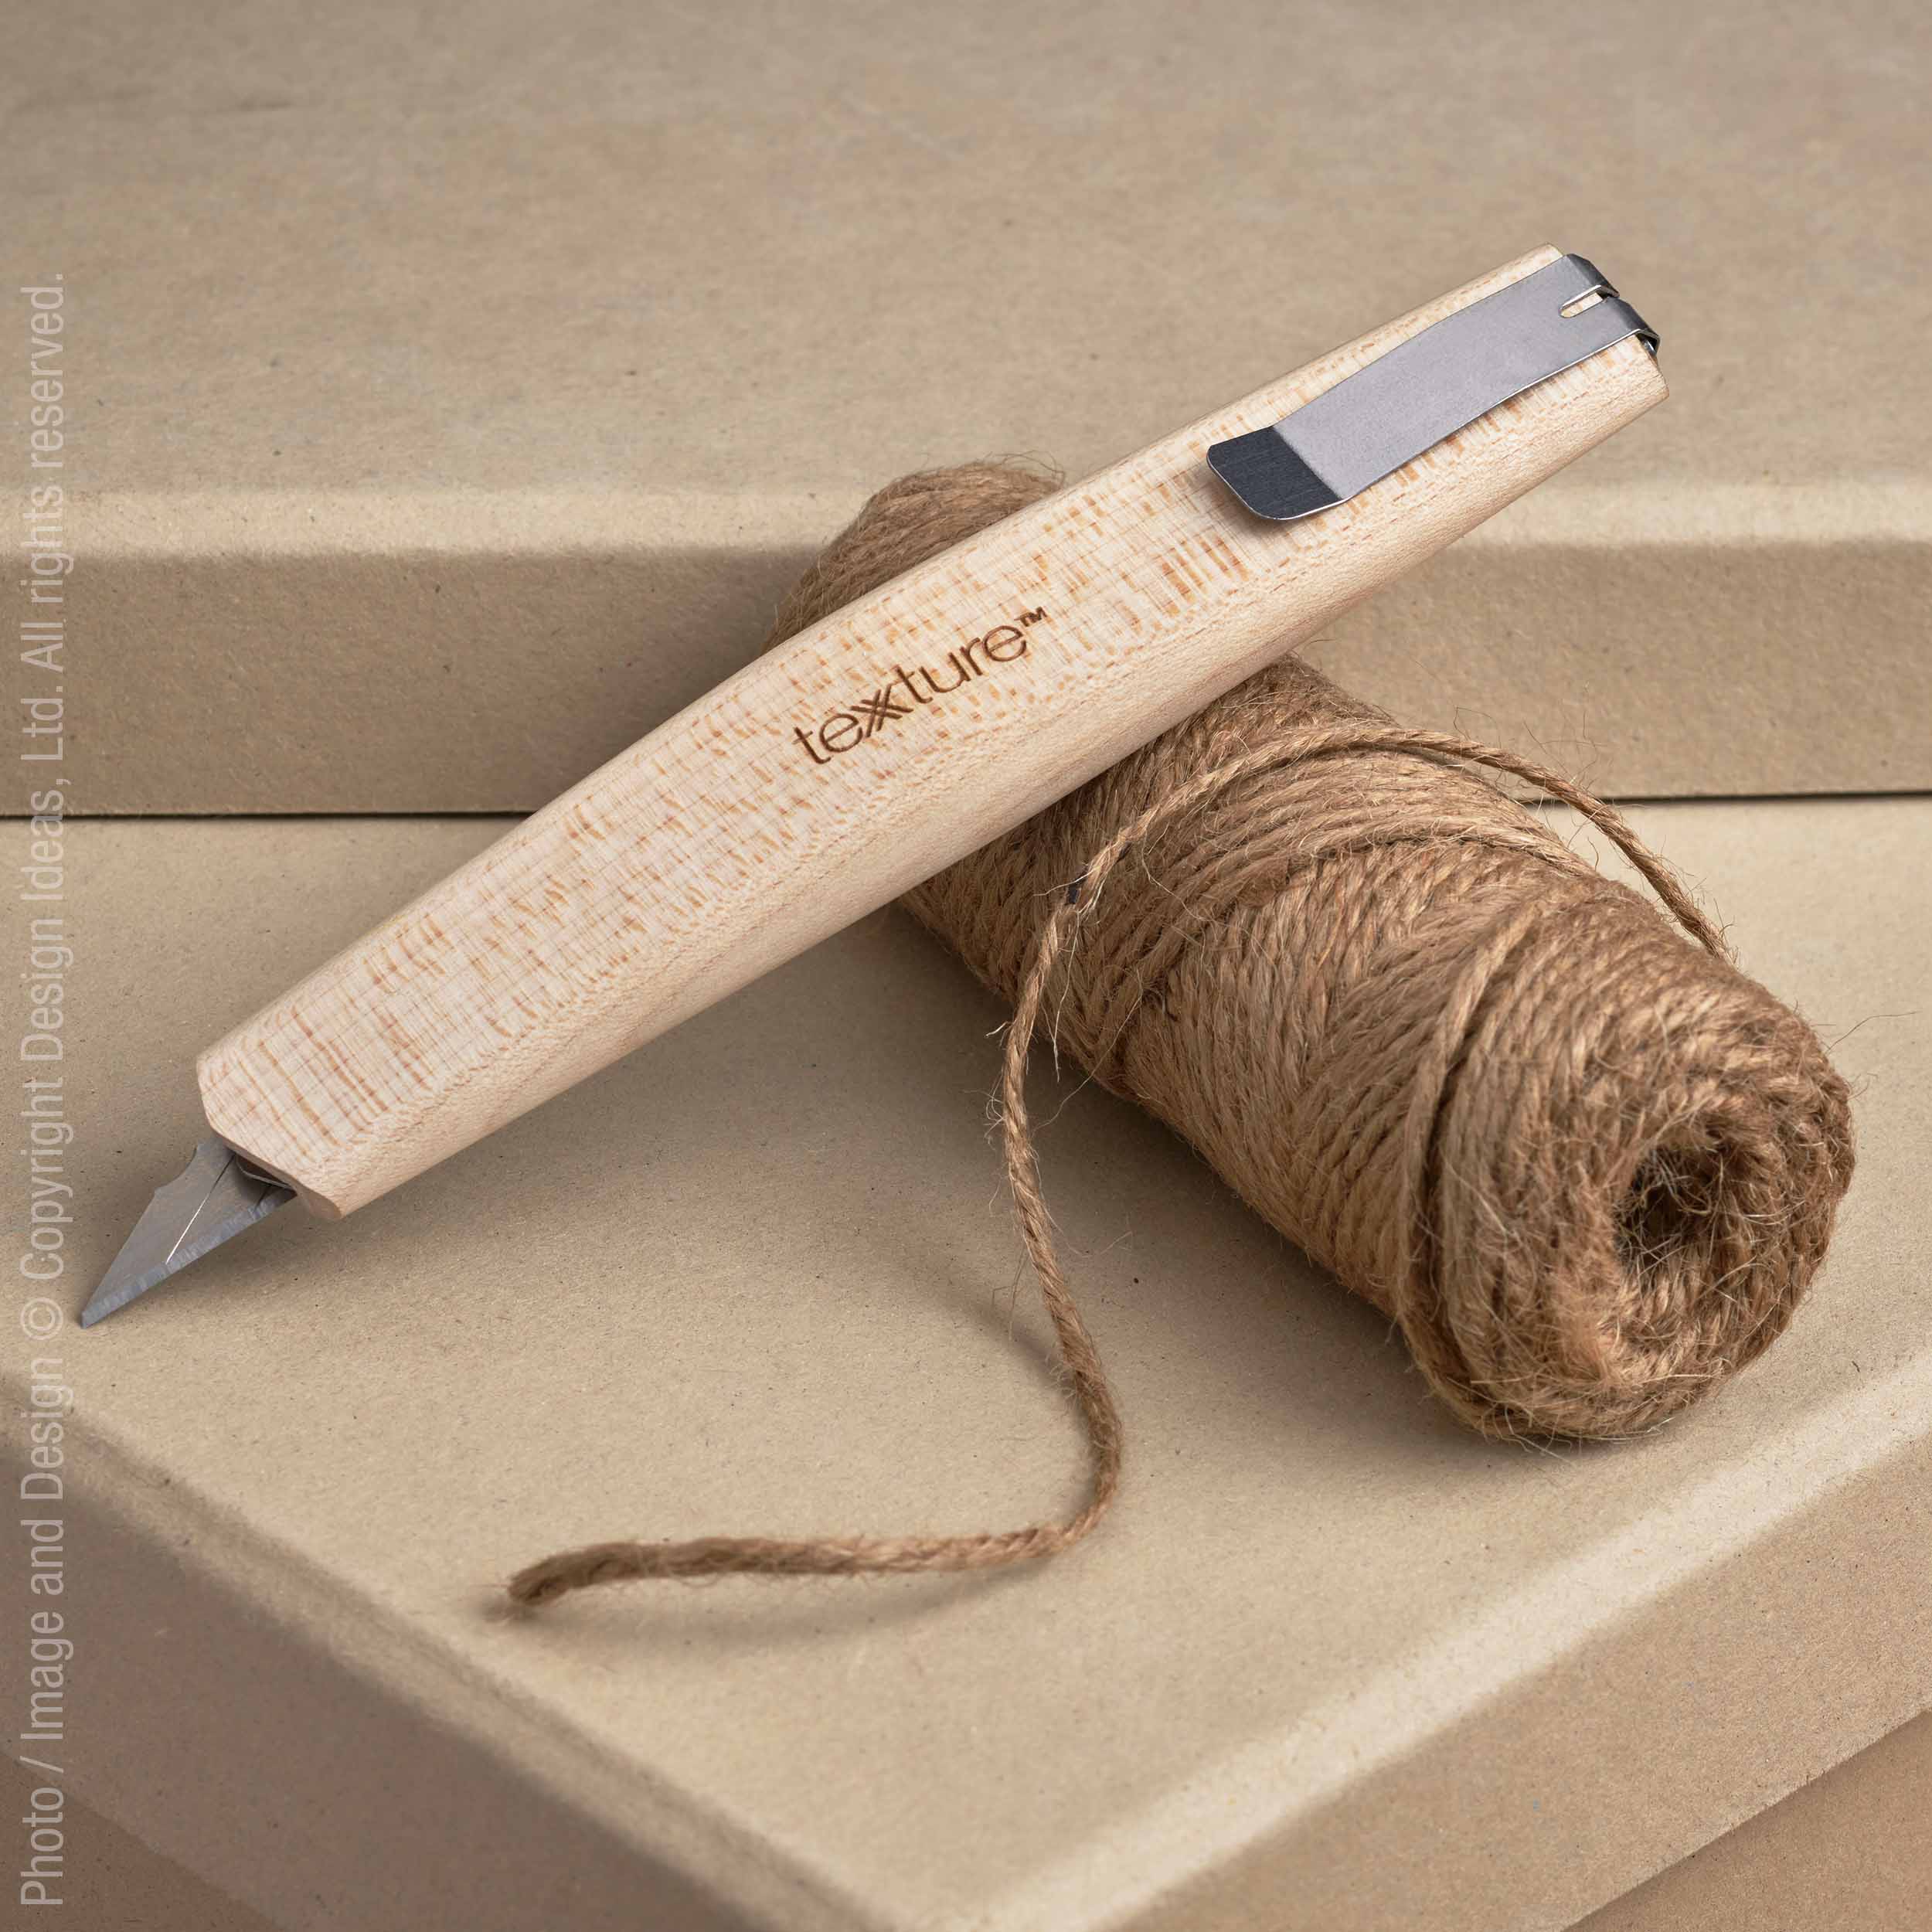 Upland™ Hand Sanded Sycamore/Metal Utility Knife - Natural | Image 1 | Premium Desk Accessory from the Upland collection | made with Sycamore for long lasting use | texxture